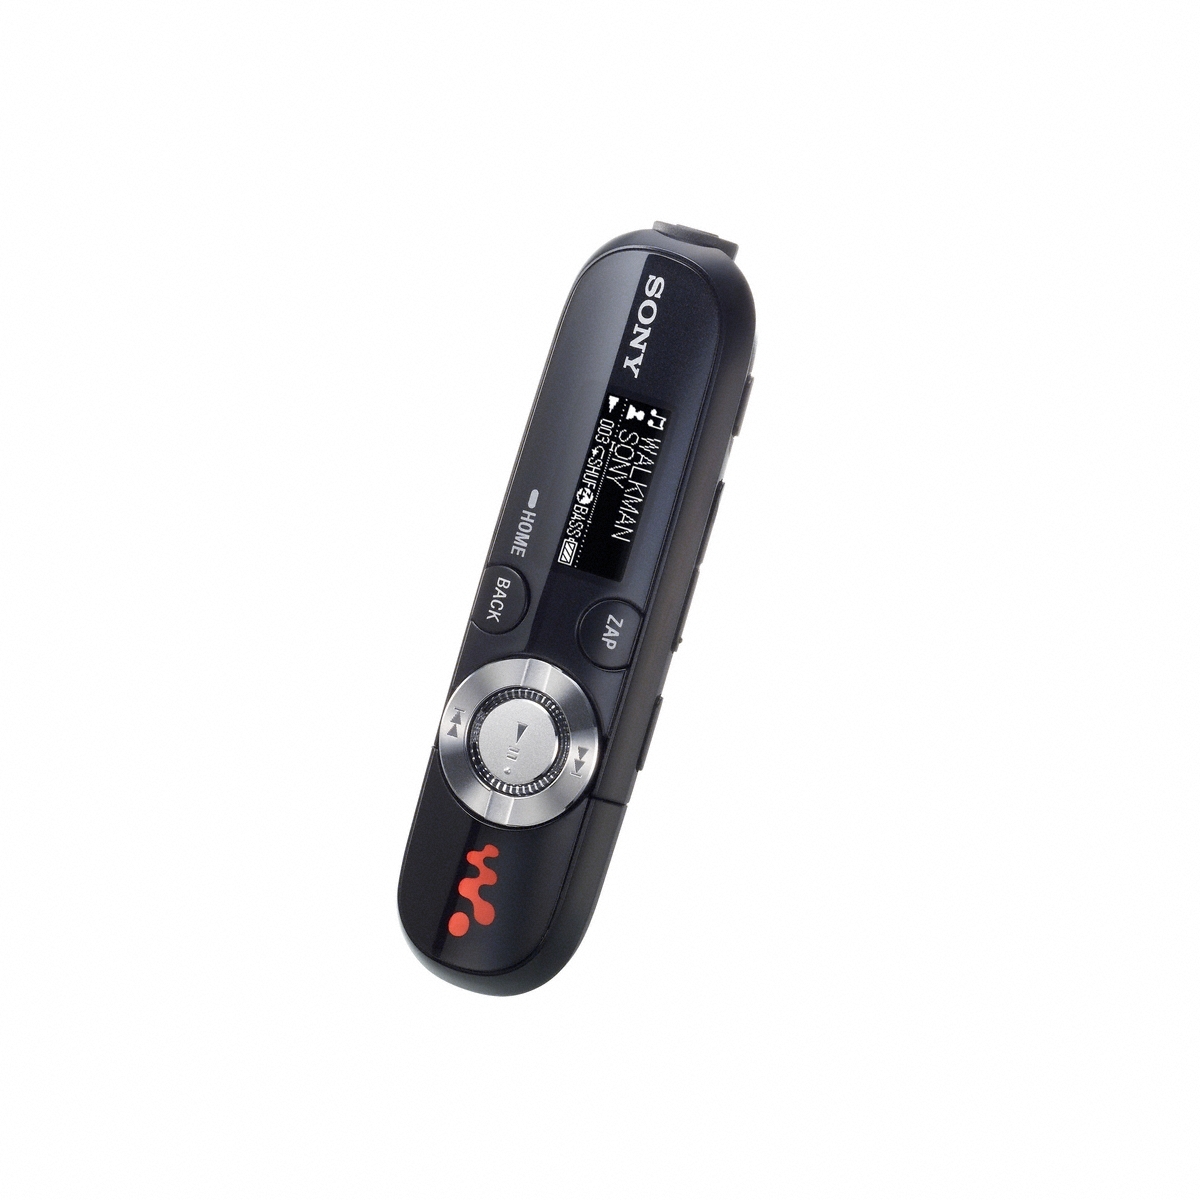   Players on Sony Announces New Walkman E Series Video Mp3 Player